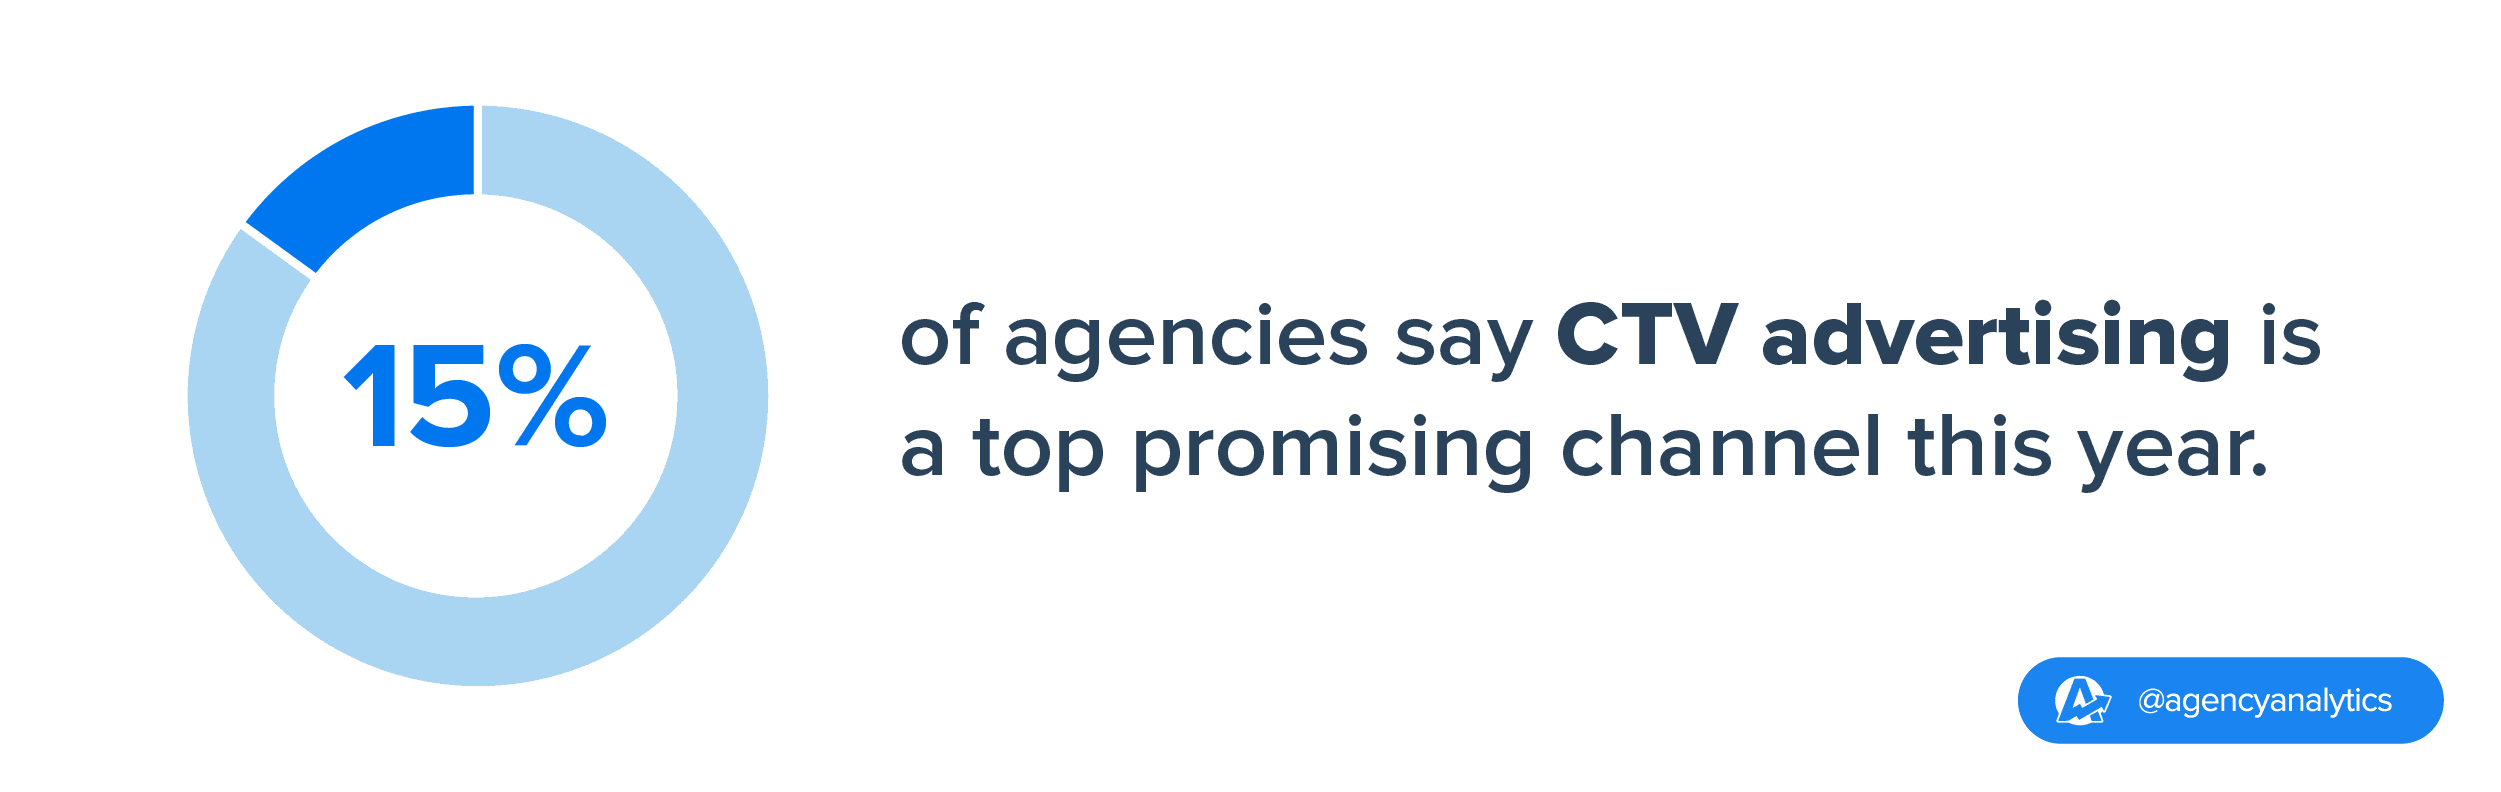 15% of agencies surveyed say that CTV advertising is the most promising channel this year